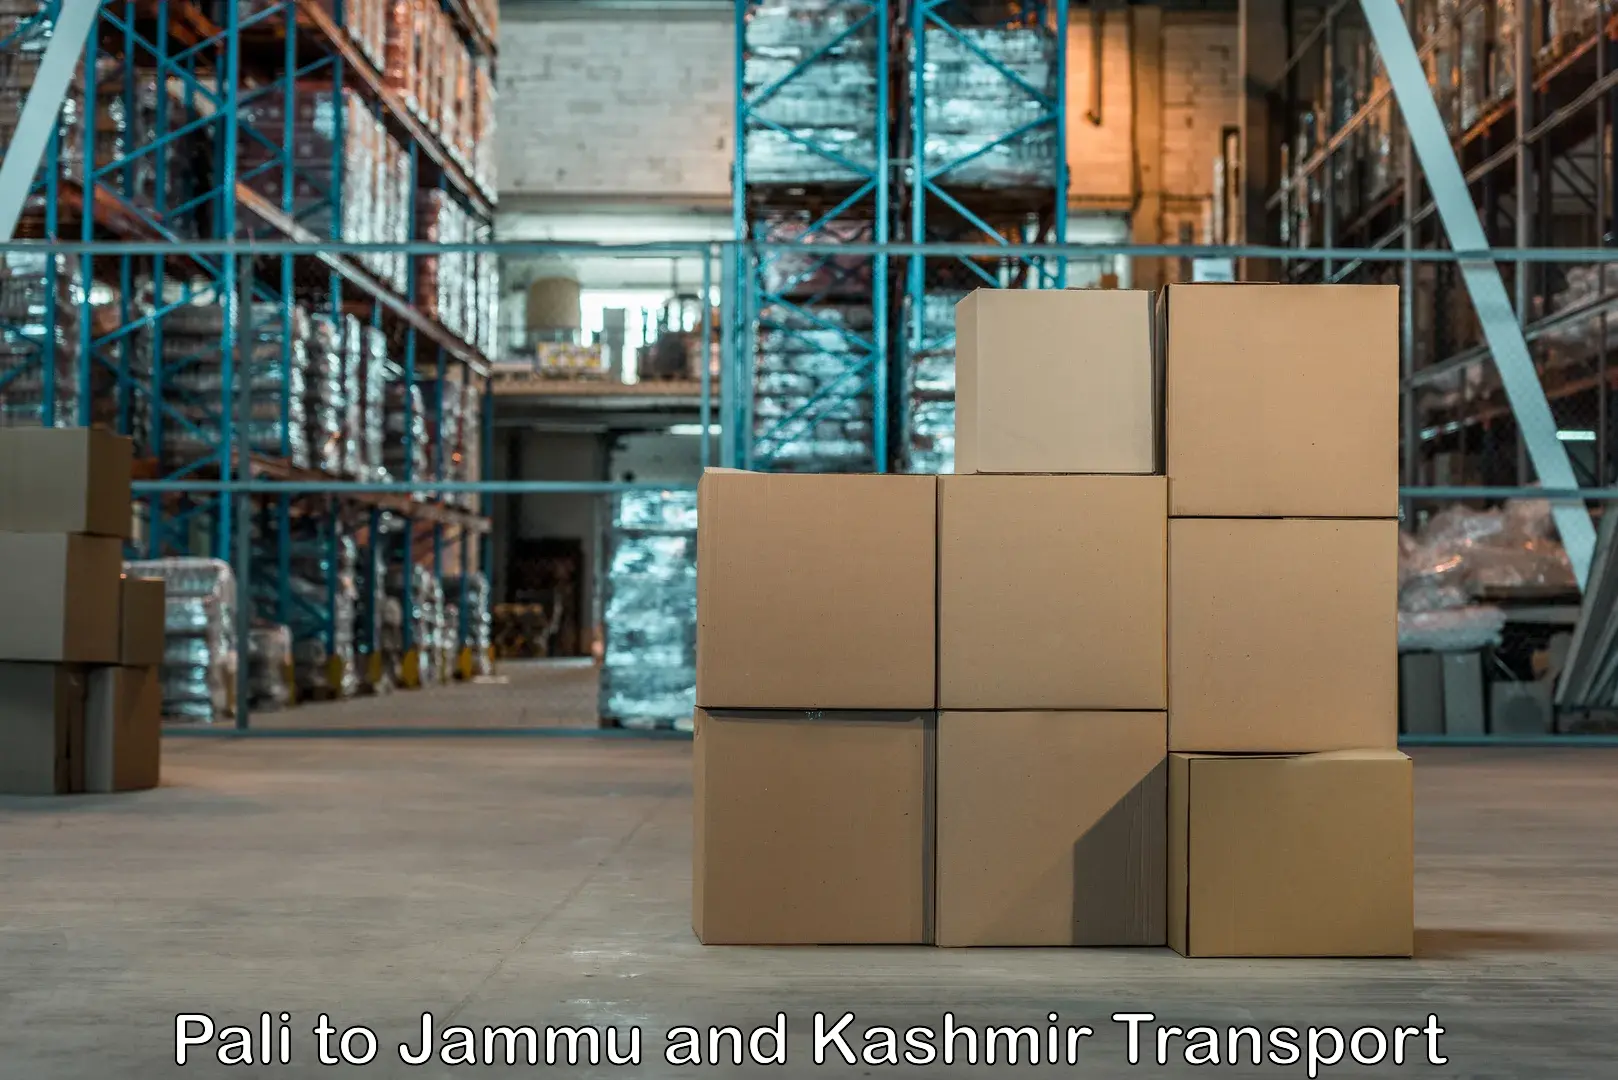 Transport in sharing Pali to Jammu and Kashmir